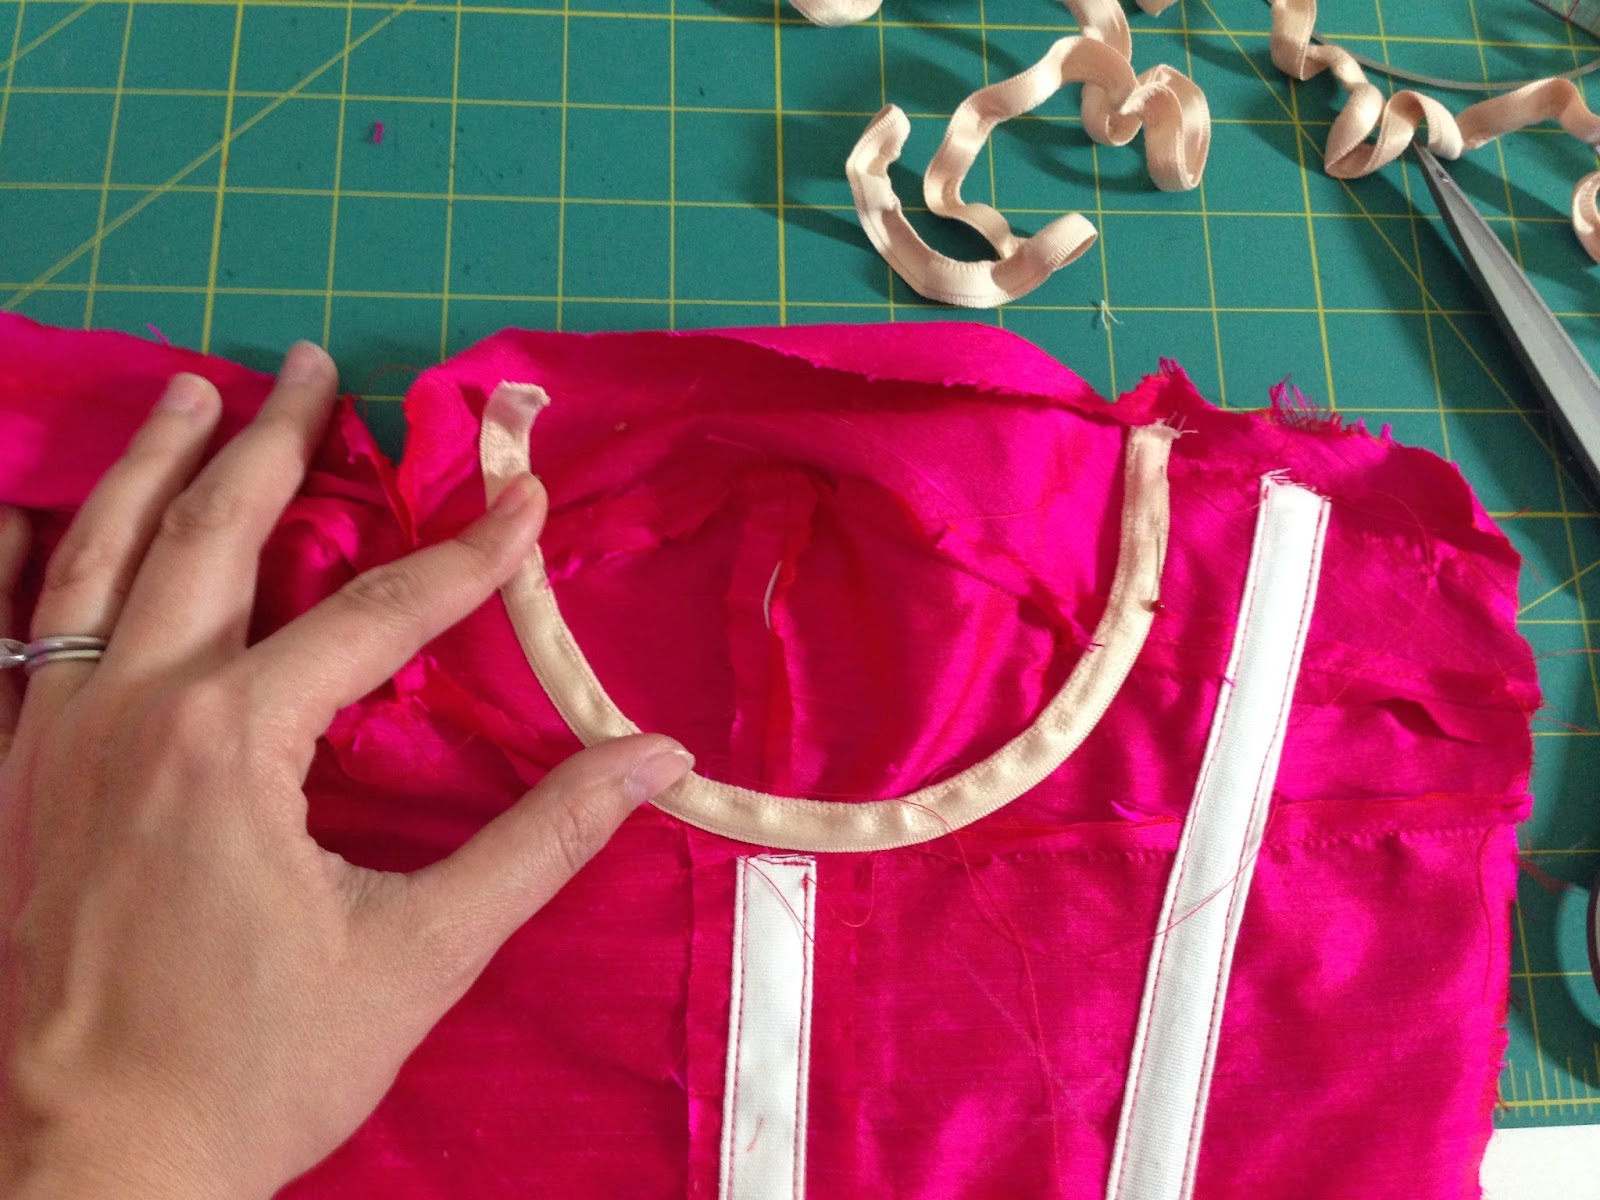 Gertie's New Blog for Better Sewing: Adding Underwires to a